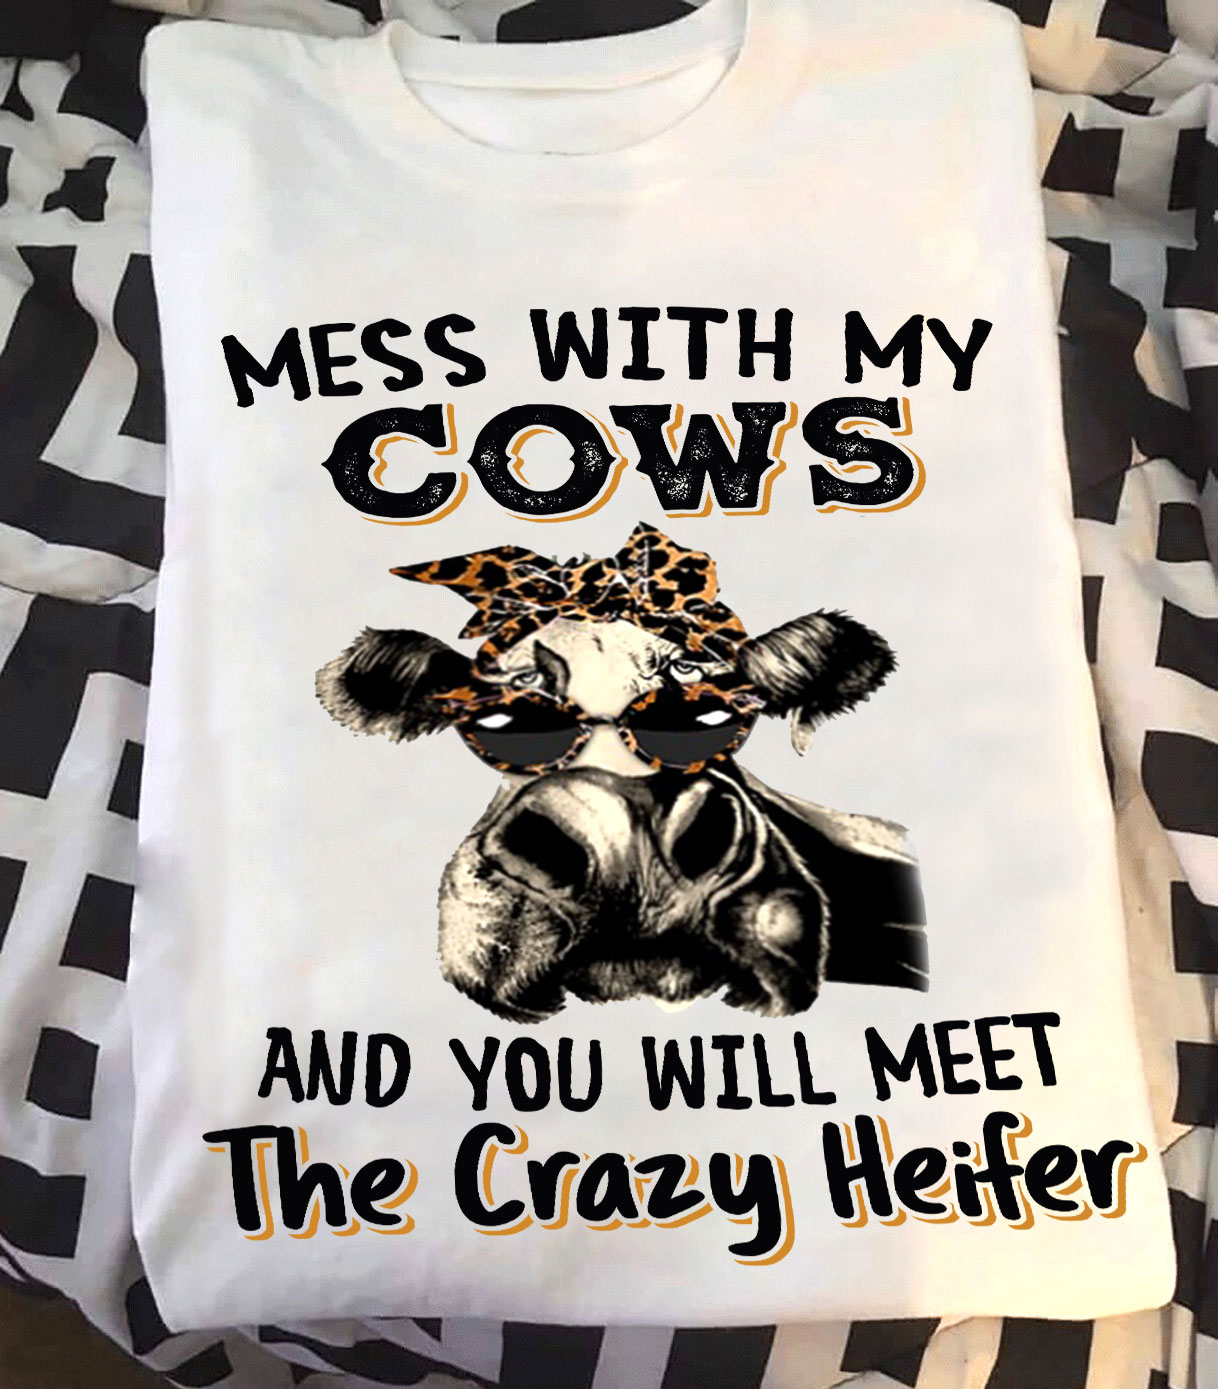 Mess with my cows and you will meet the crazy heifer